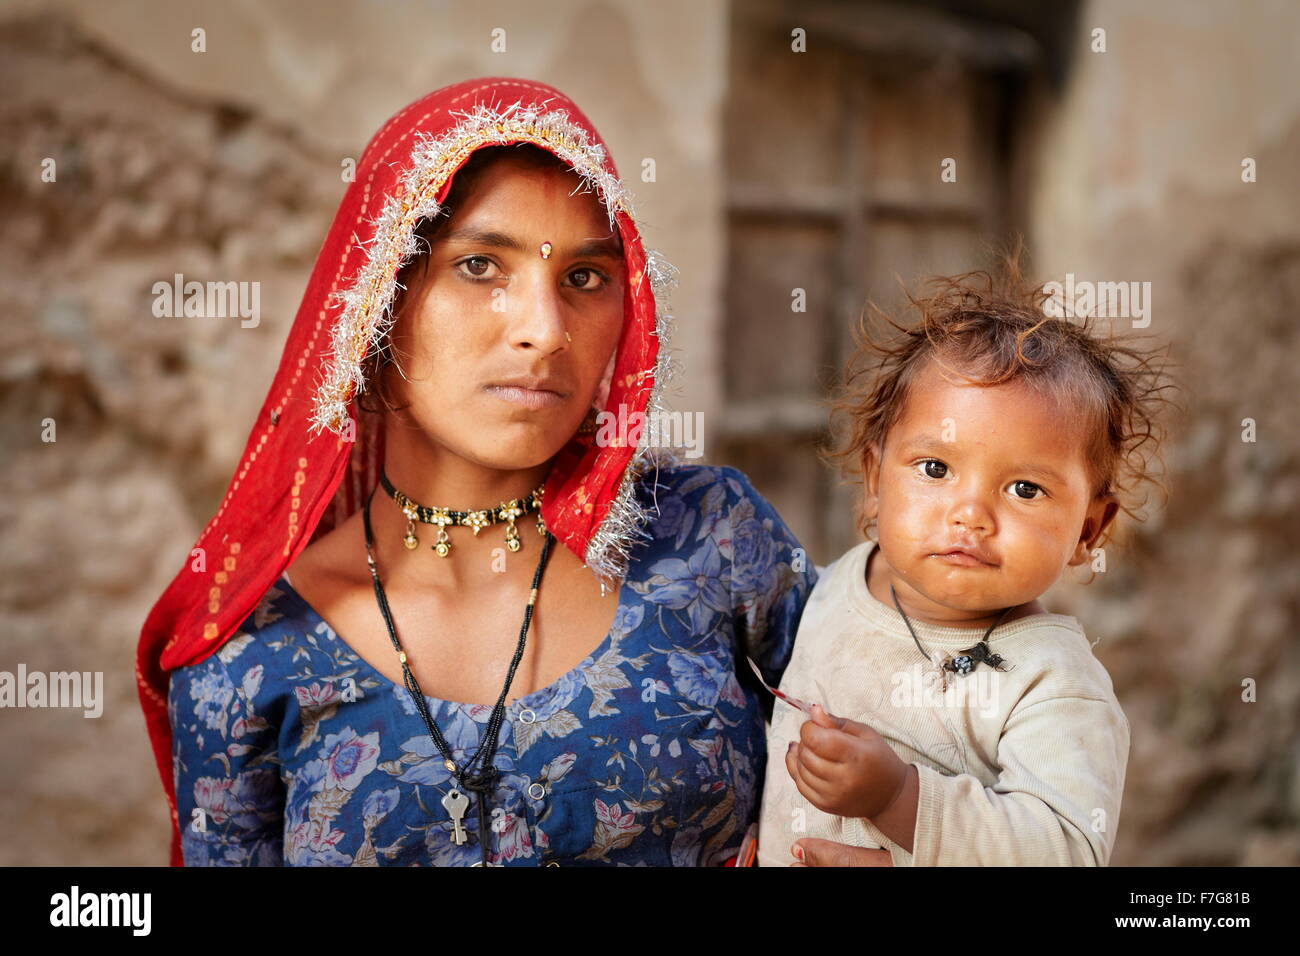 Portrait of young india woman and her small baby child, Mandawa, India Stock Photo